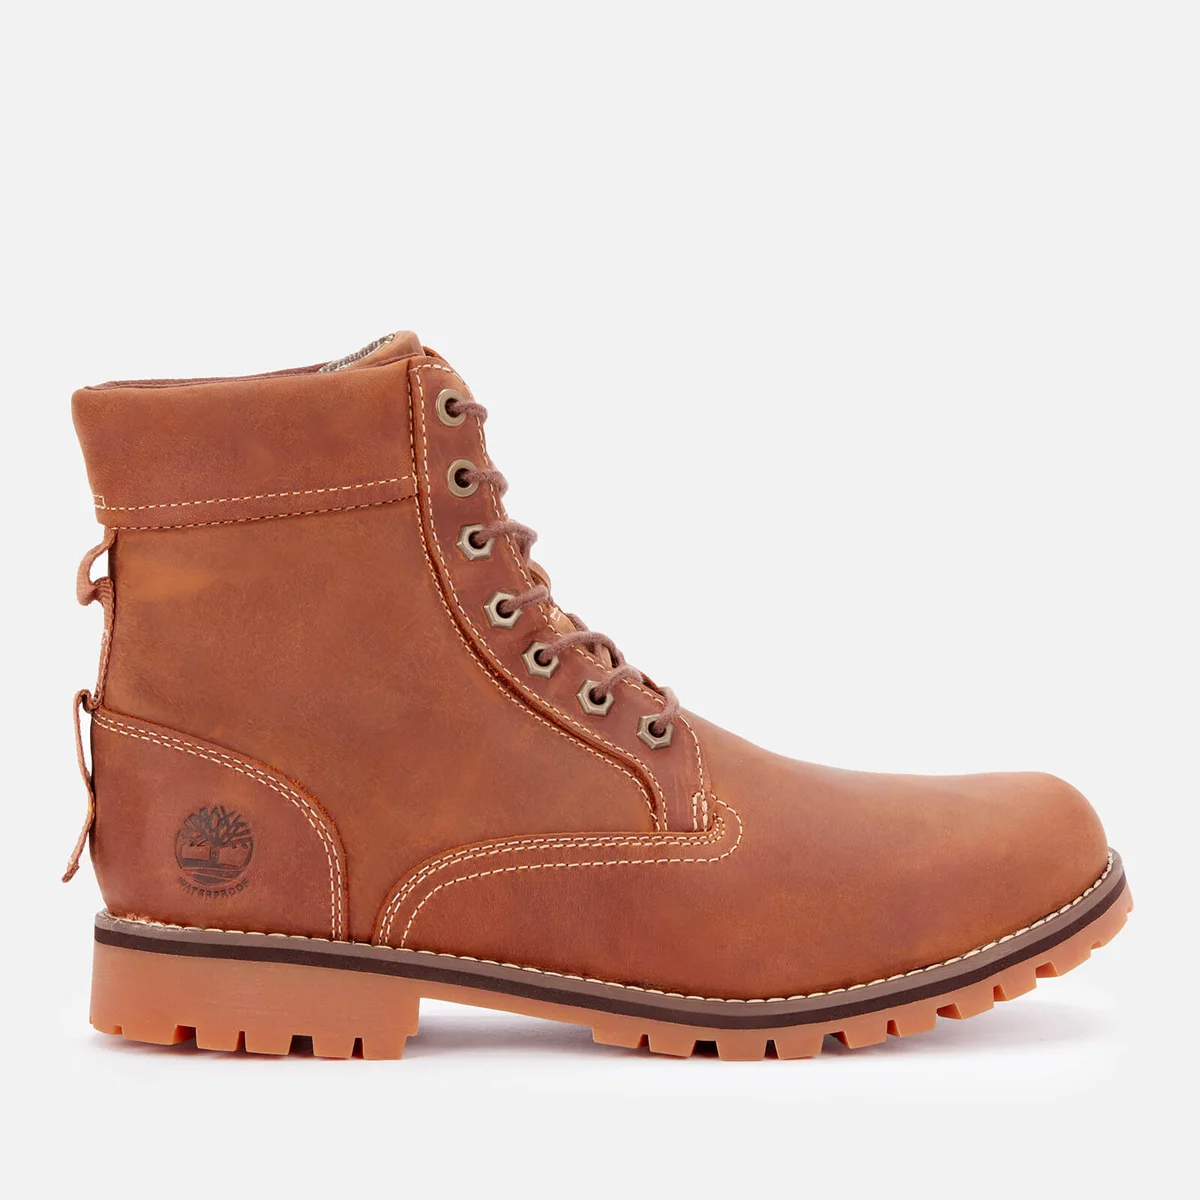 Timberland Men's Rugged Waterproof Leather II 6 Inch Boots - Rust Image 1